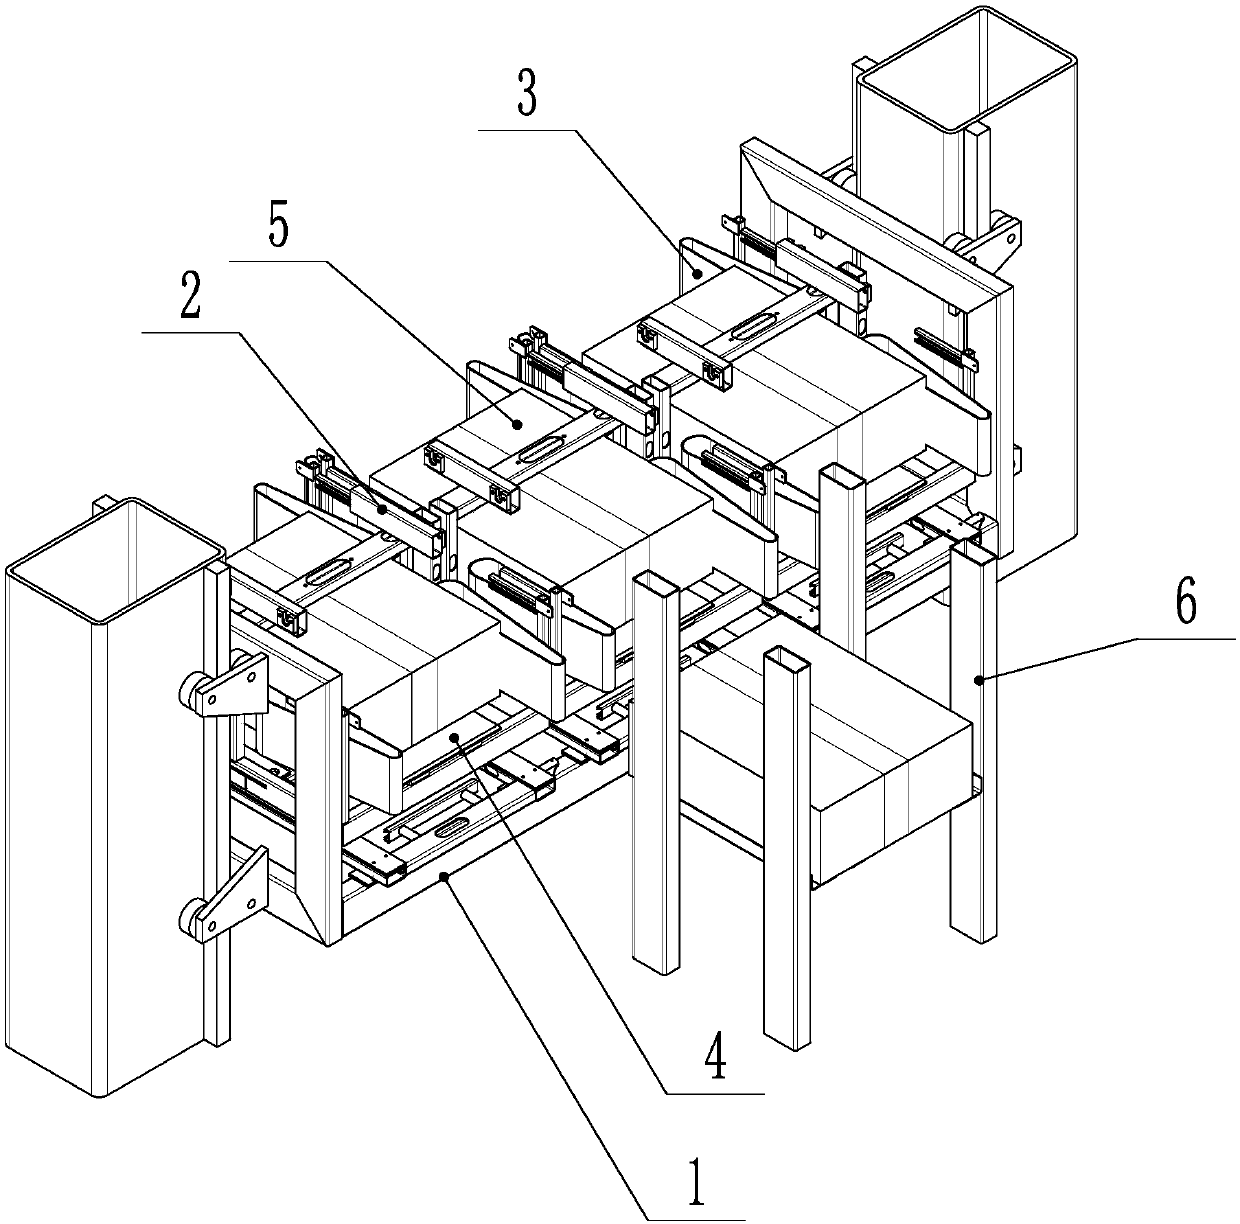 Embracing-clamping type pallet fork mechanism applied to material box stacker